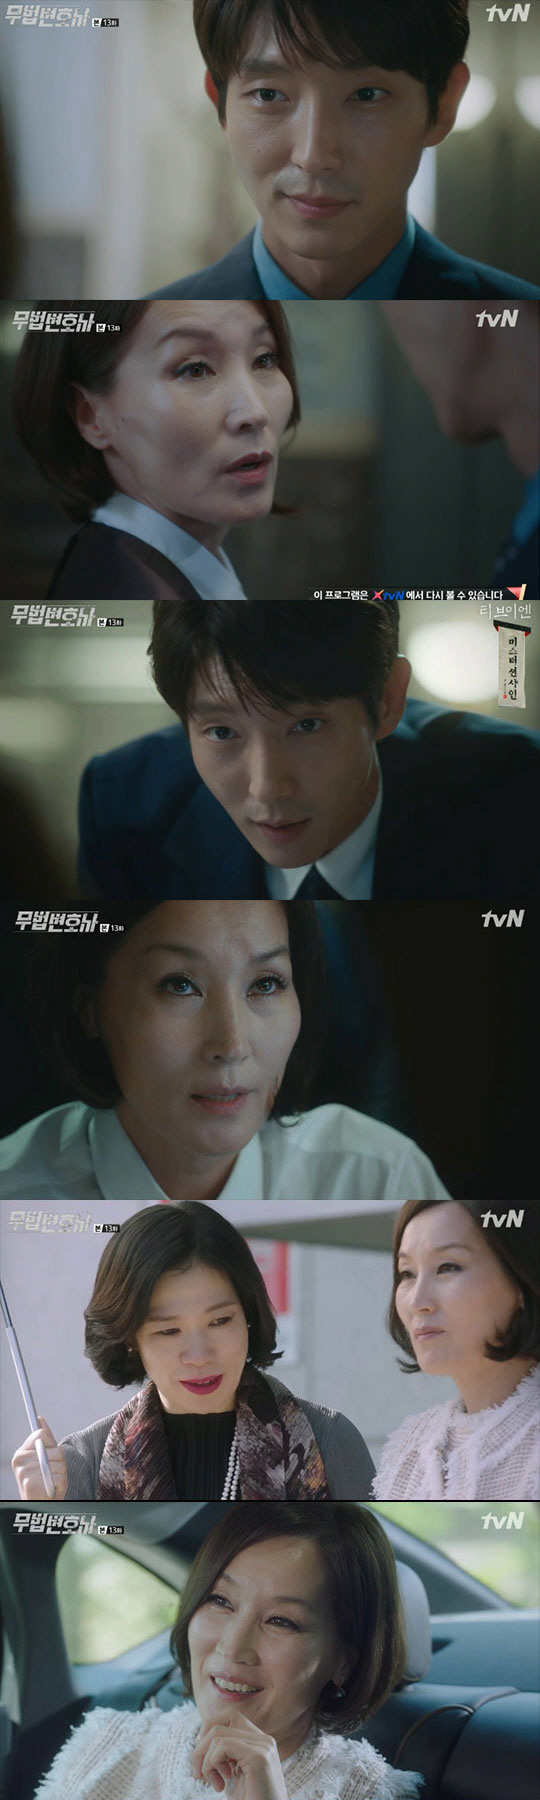 The revenge of Lawless Lawyer Lee Joon-gi began in earnest; the first target was Yum Hye-ran, secretary of Lee Hye-Yeong.On the 23rd, TVN Lawless Lawyer showed Bong Sang-pil (Lee Joon-gi), who reunited Ha Jae-yi (Seo Ye-ji) - Noh Hyun-joo (Baek Joo-hee)s mother and daughter, taking a blade in earnest toward Cha Moon-sook.On this day, Ha Jae-yi asked An Oh-ju (Choi Min-soo) to find his mother, Roh Hyun-joo, while asking the factory head (Kim Kwang-gyu) to investigate further Roh Hyun-joo and Cha Moon-sook.Anoju rolled his head on the fact that Roh Hyun-joo, the only witness to the Murder case 18 years ago, was alive.Cha Moon-sook ordered Kwon Man-bae (Lee Hyun-gul), a traitor who was the second-in-command of the Choi Dae-woong (guided) faction, to lock Noh Hyun-joo through Yum Hye-ran.However, Bong Sang-pil pretended to have killed Noh Hyun-joo through the third-in-command, Scorpion (Kim Yong-woon), and finally succeeded in reuniting his daughter Ha Jae-yi with tears.Ha Jae-yi thanked Bong Sang-pil and solved the misunderstanding, but Ahn felt that he was thoroughly used by Bong Sang-pil in the process.Cha Moon-sook instructed Nam Soon-ja to organize his own account, while reminding him that the person who recommended Noh Hyun-joo was Nam Soon-ja.Fearful Nam Soon-ja, along with his daughter Kang Yeon-hee (Cha Jung-won), vowed allegiance to Cha Moon-sook and ordered Kwon Man-bae to kill Noh Hyun-joo.Kwon Man-bae recorded it and reported it to Cha Moon-sook, who ordered the video police of the Murder teacher to shed it. Eventually, Nam Soon-ja was arrested in front of the court on Kang Yeon-hees way to work.Jang Sang-ik (Park Jung-hak) issued an arrest warrant for An-oh-joo on charges of Murder teacher, and An-oh-joo went into hiding, pledging revenge on Cha Moon-sook and Bong Sang-pil.Bong Sang-pil realized that the person who sent the note to him was Cha Moon-sook, and realized that Cha Moon-sook had attracted himself to remove his too-covered aides.Bong Sang-pil visited Cha Moon-sook and said, You are writing well. There is something not in this note. It is your end.Cha Moon-sook said, The relationship between you and Ha Jae-yi will catch your ankle, but Bong Sang-pil said, It will be your biggest loophole that I can not understand the relationship between me and Ha Jae-yi.The total 16-part series, Lawless Lawyer, has only three episodes left on Sundays broadcast.I wonder how Bong Sang-pil will prevent Cha Moon-sooks appointment as Chief Justice and will take revenge.